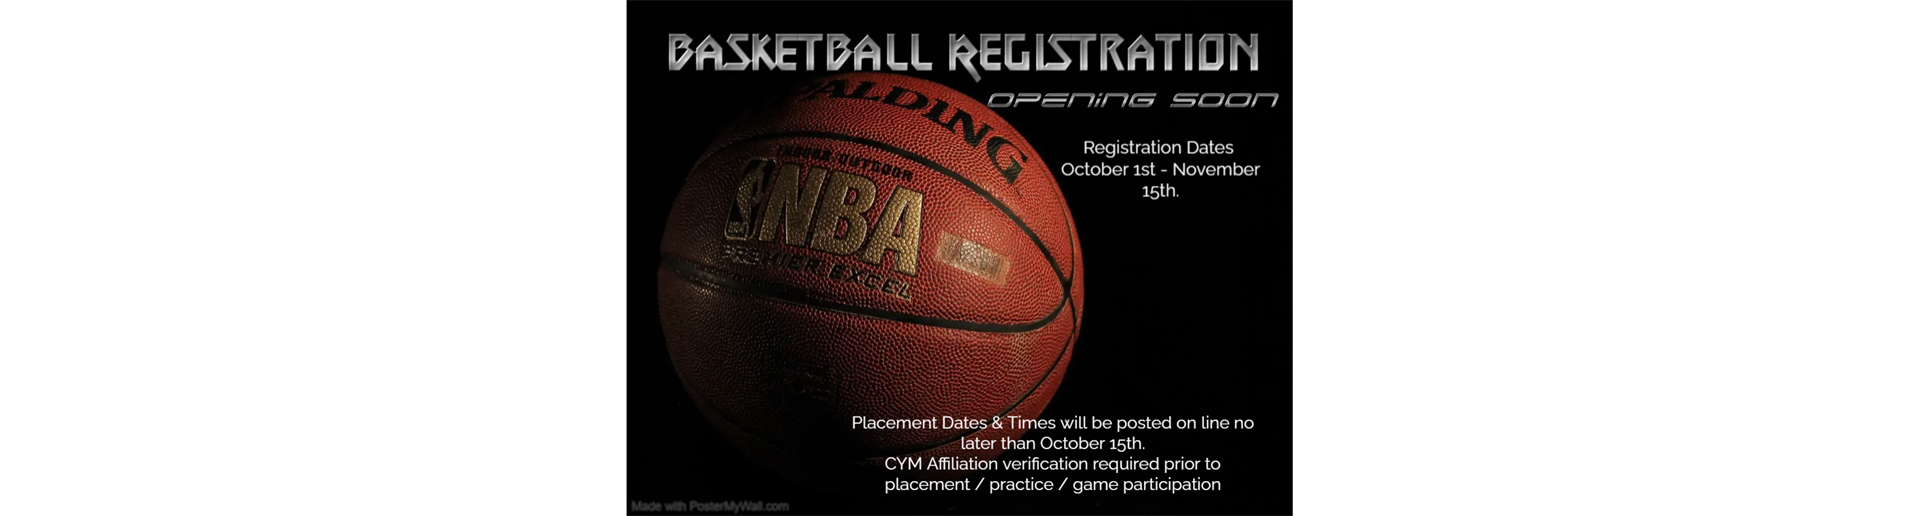 Registration for WINTER BASKETBALL is OPENING SOON!!!